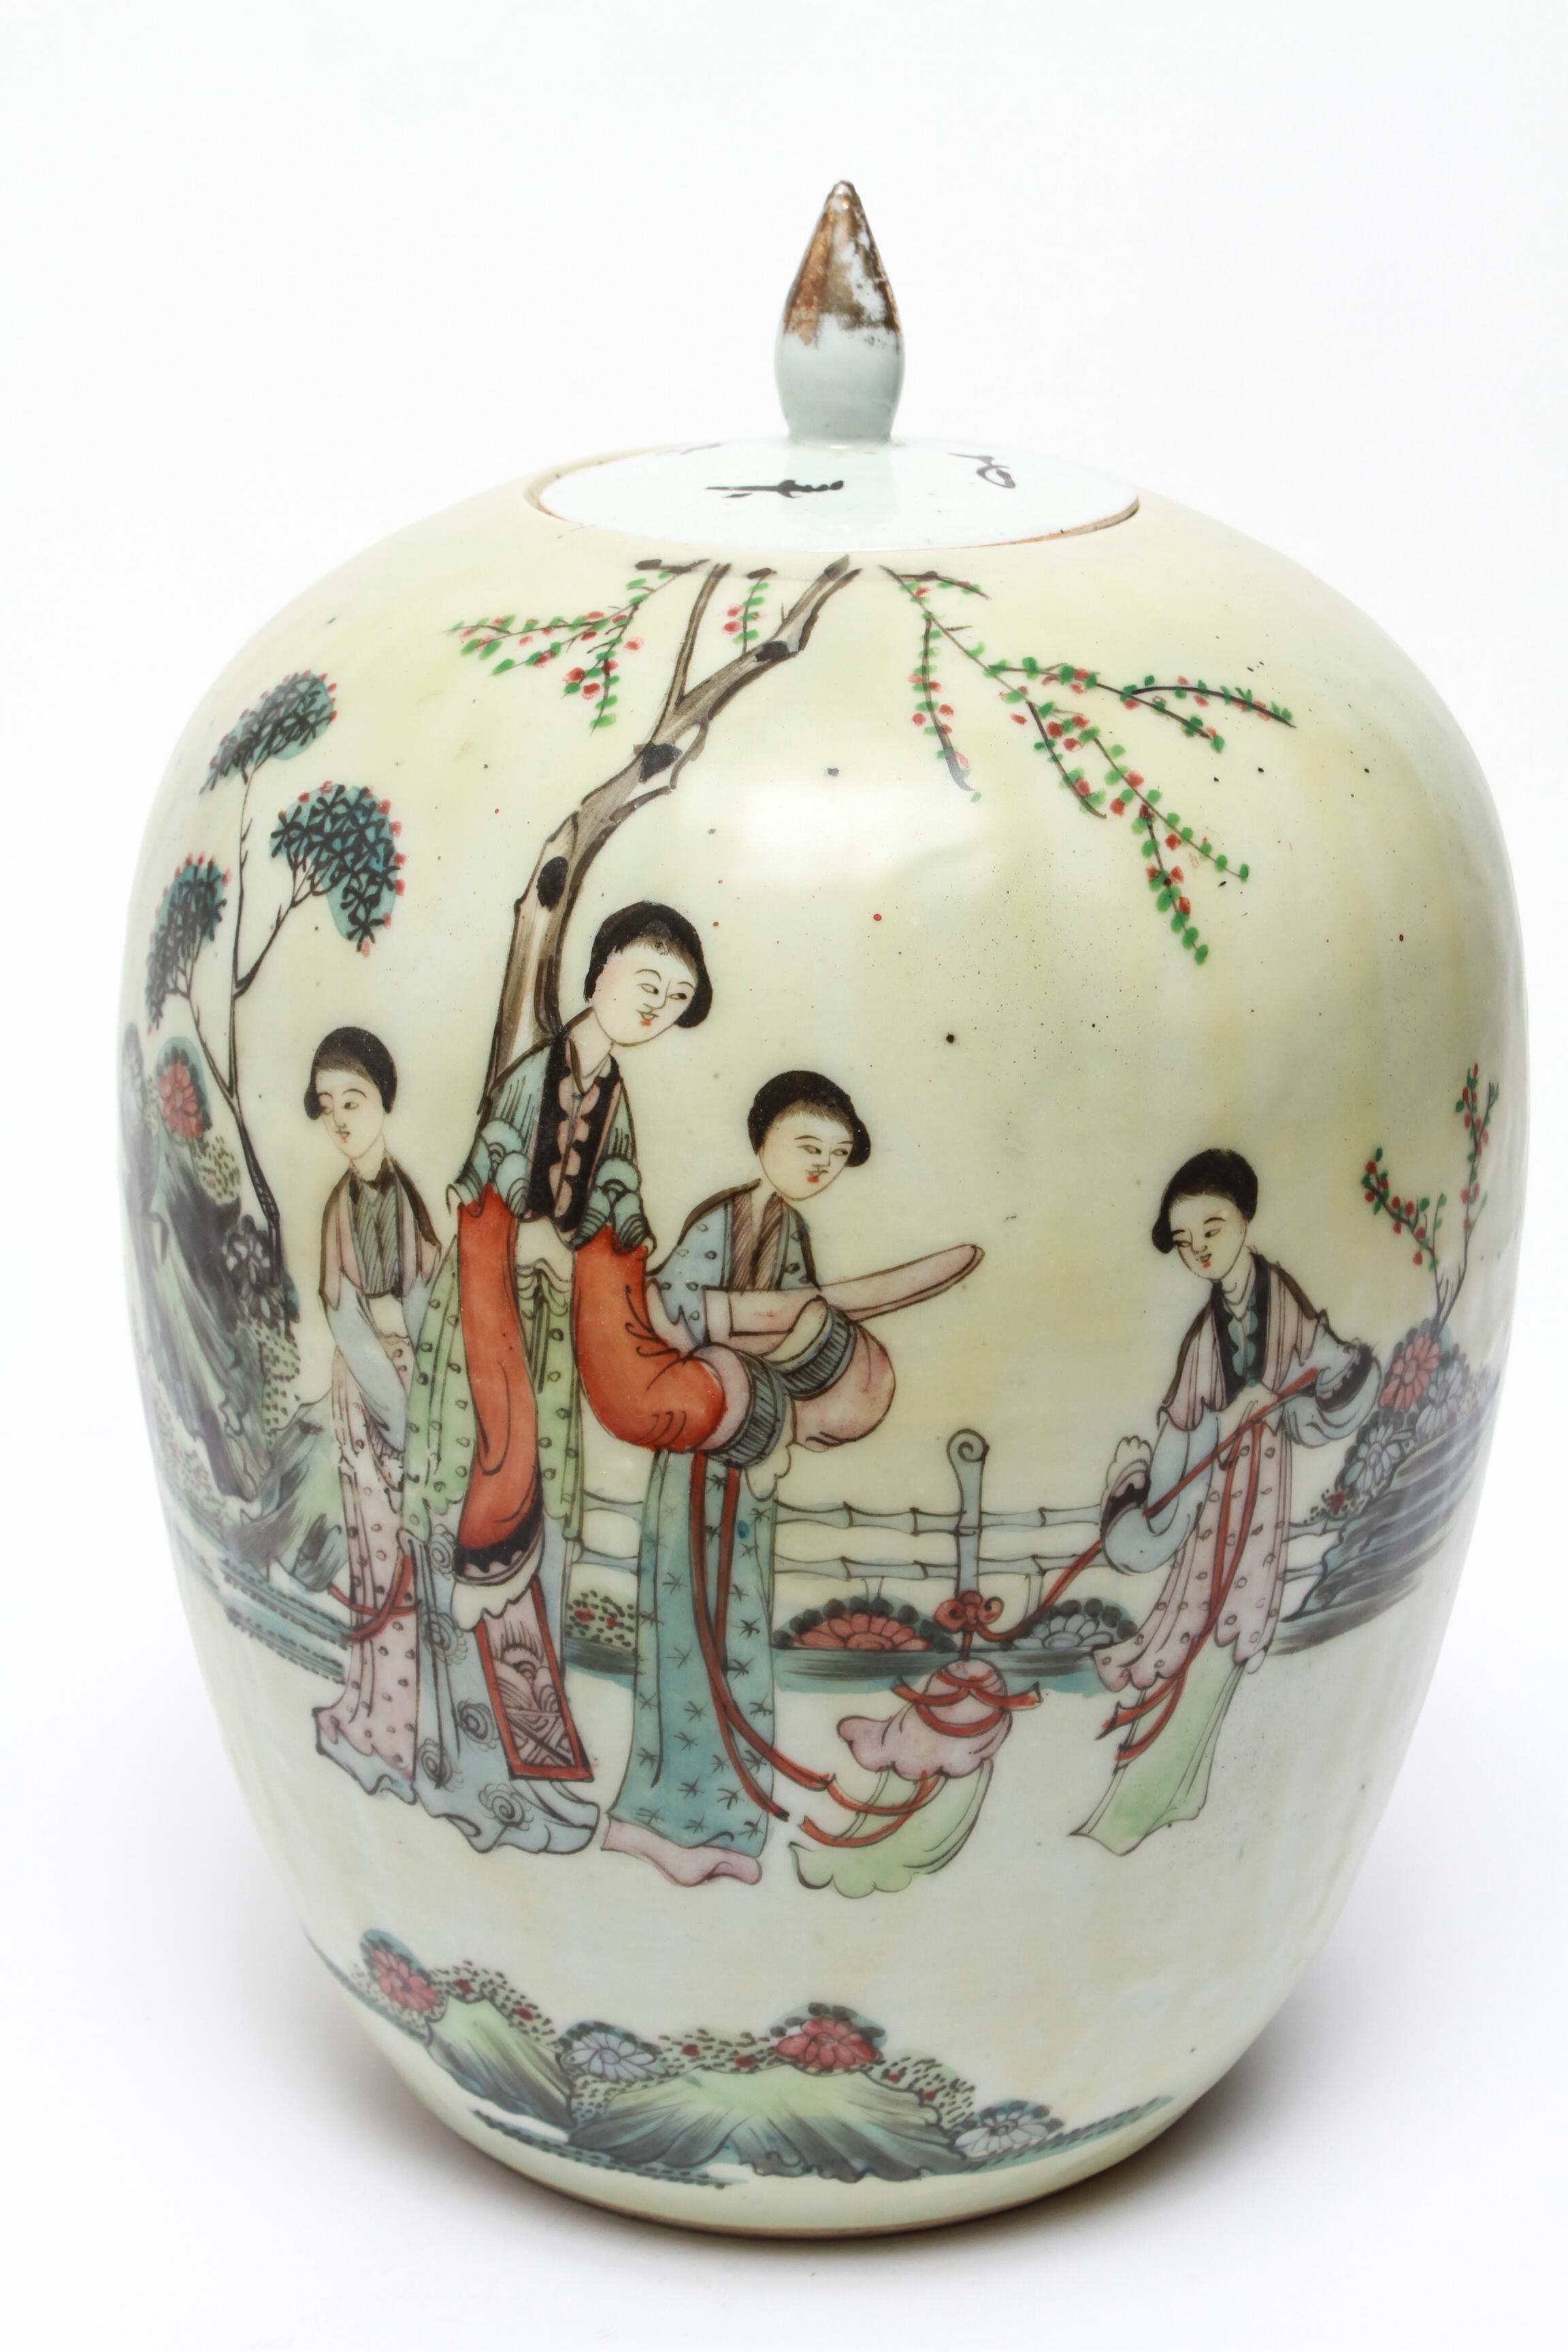 Chinese pair of Qing style hand-enameled ceramic ginger jars with scene of noblewomen in a garden with flowering trees and bushes. The side and flat lid with Chinese inscriptions and gilt-tipped lotus bud knobs. Some scattered rust spots and one lid